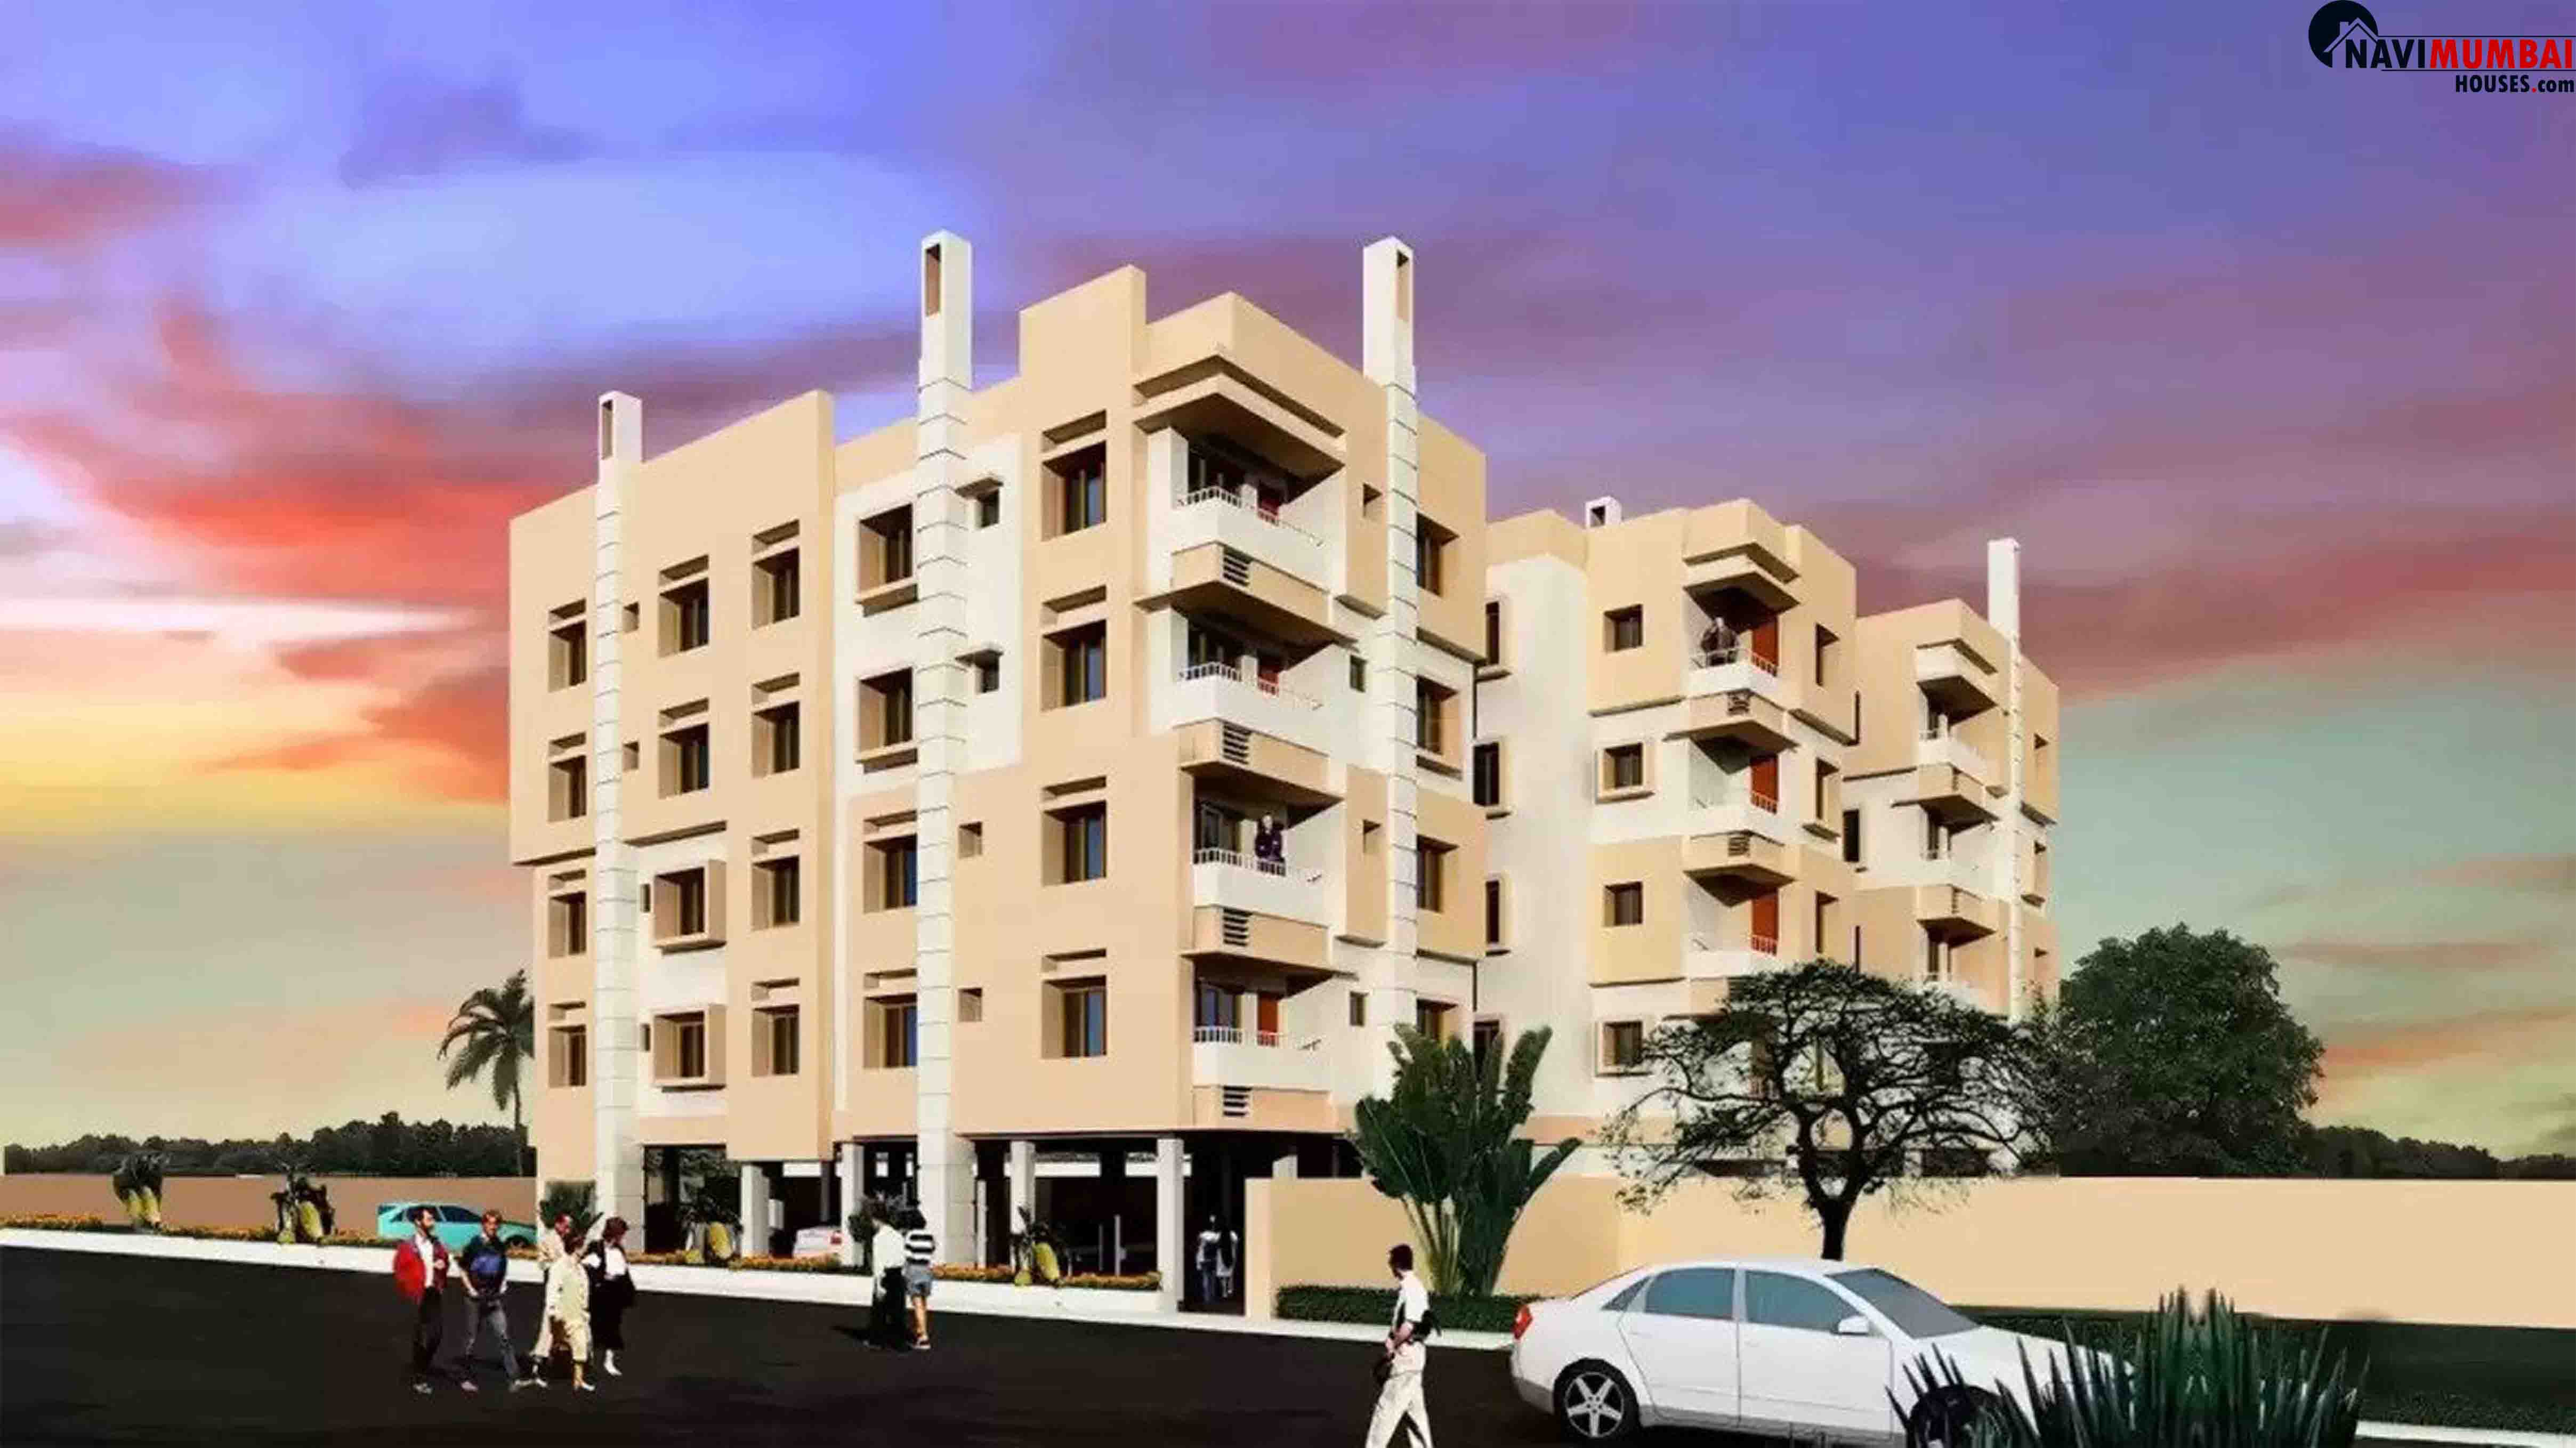 1 bhk, 2 bhk, flats in vashi, new projects and property vashi